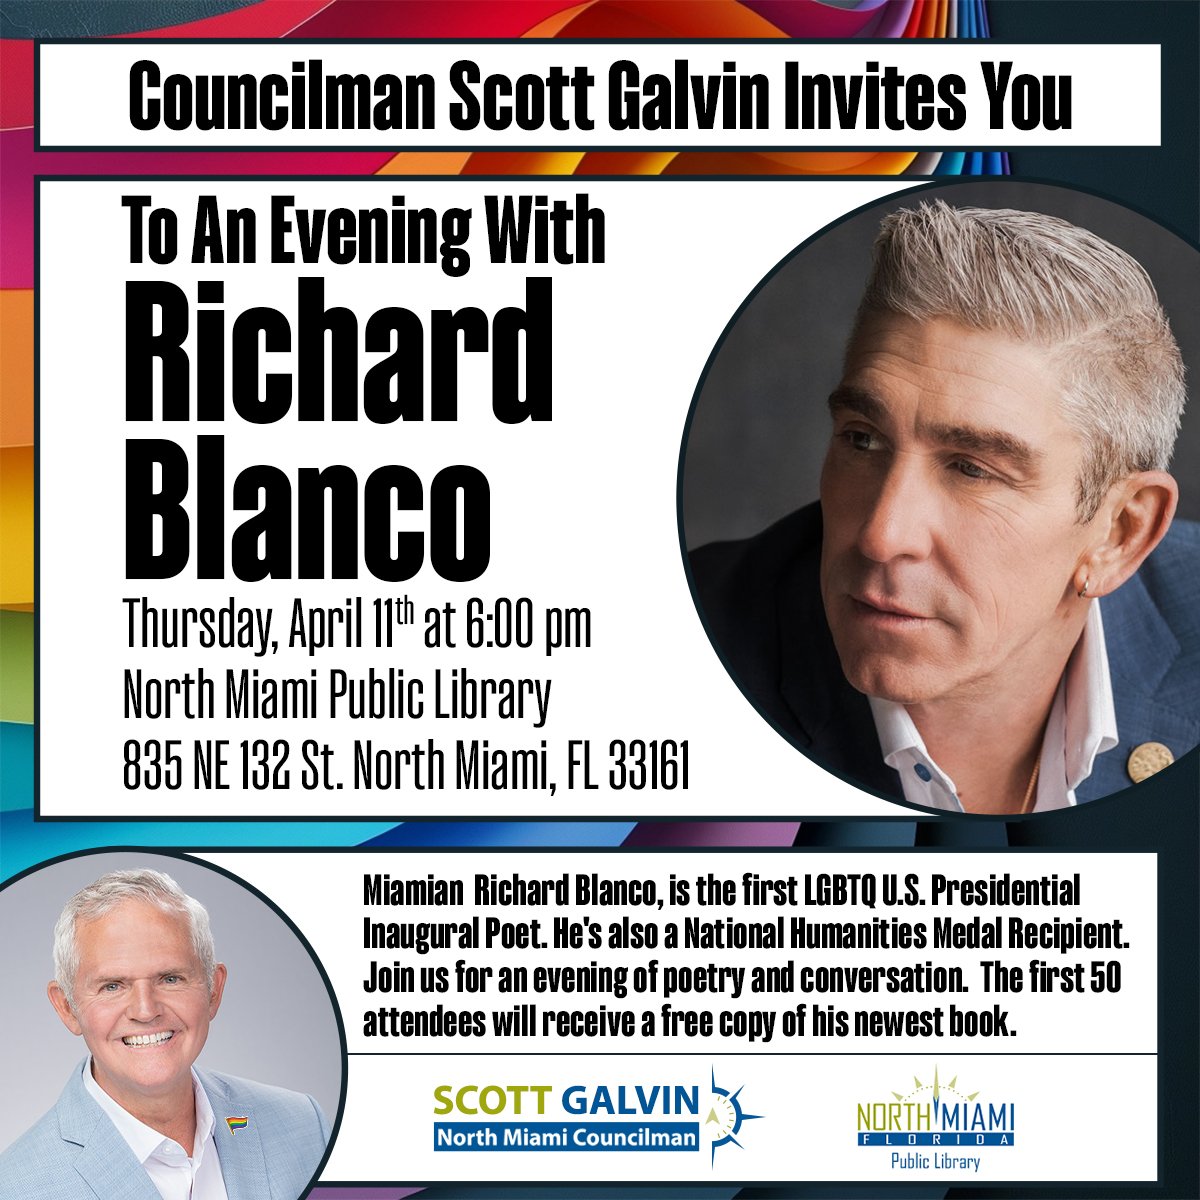 A great event at the North Miami Public Library, cosponsored by the Friends of North Miami Library. And it's FREE! @NoMiNews @rblancopoet